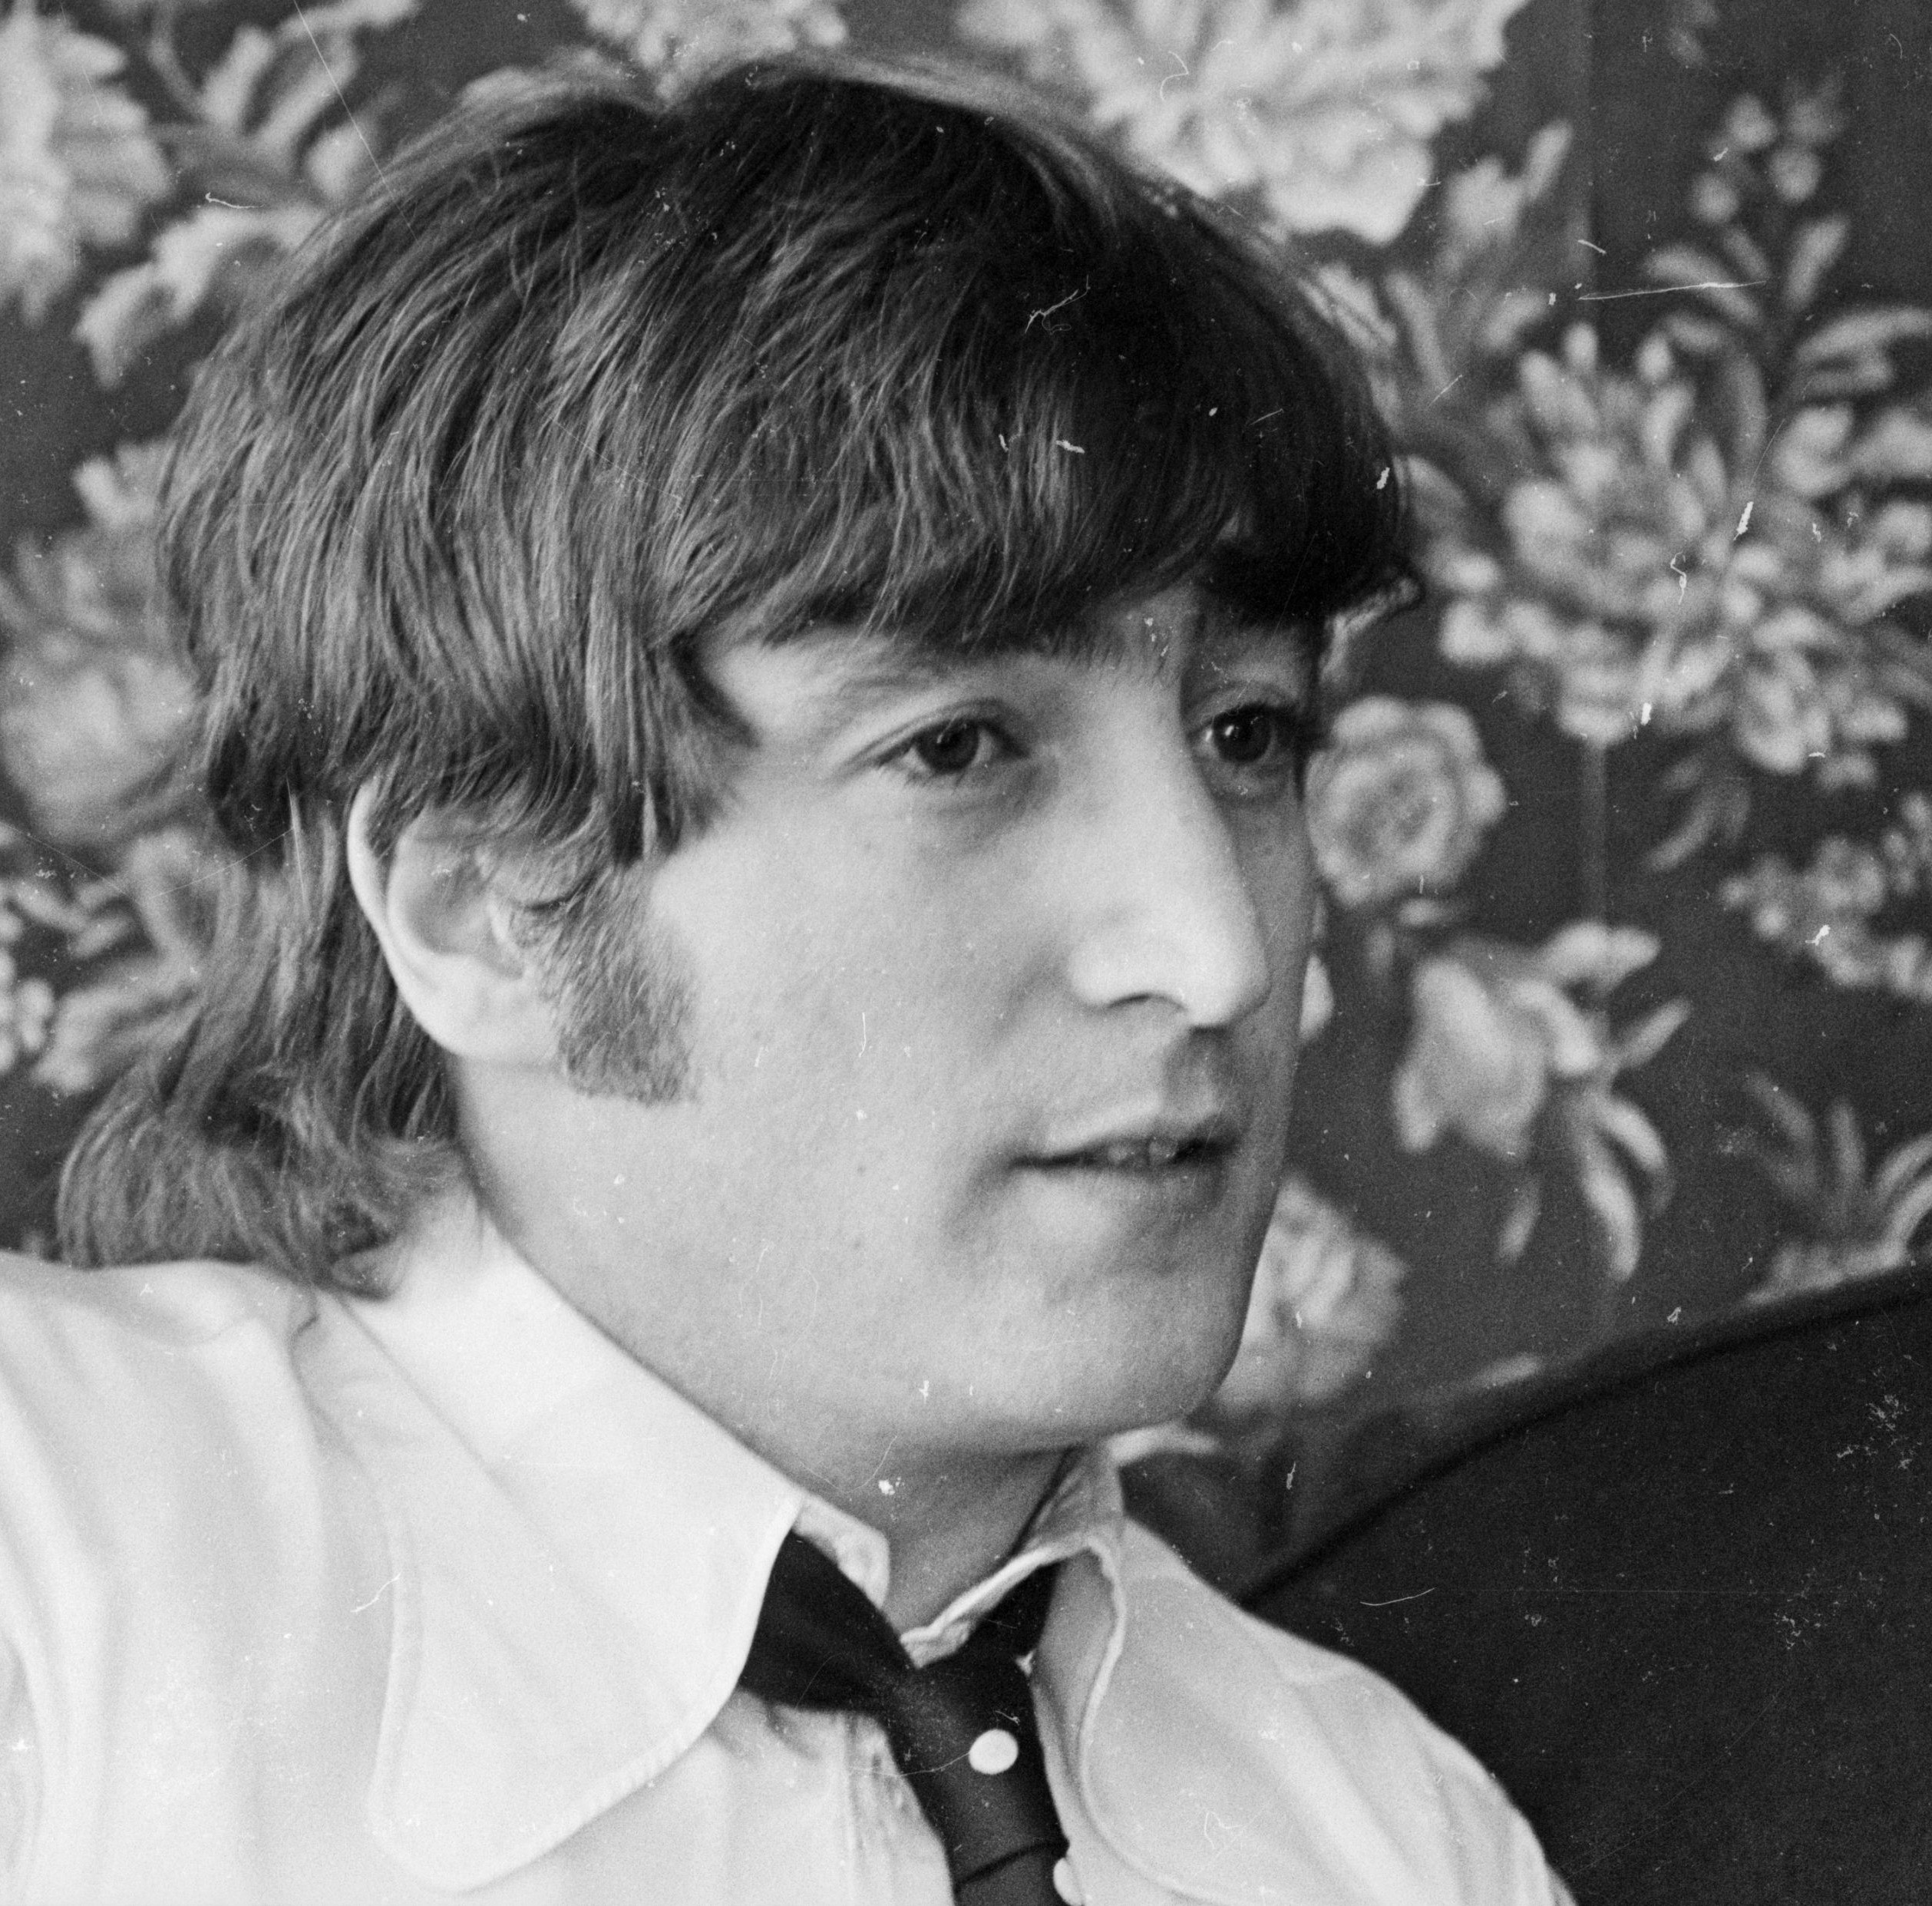 John Lennon Discussed How Jesus Would React to The Beatles’ ‘Eleanor Rigby’